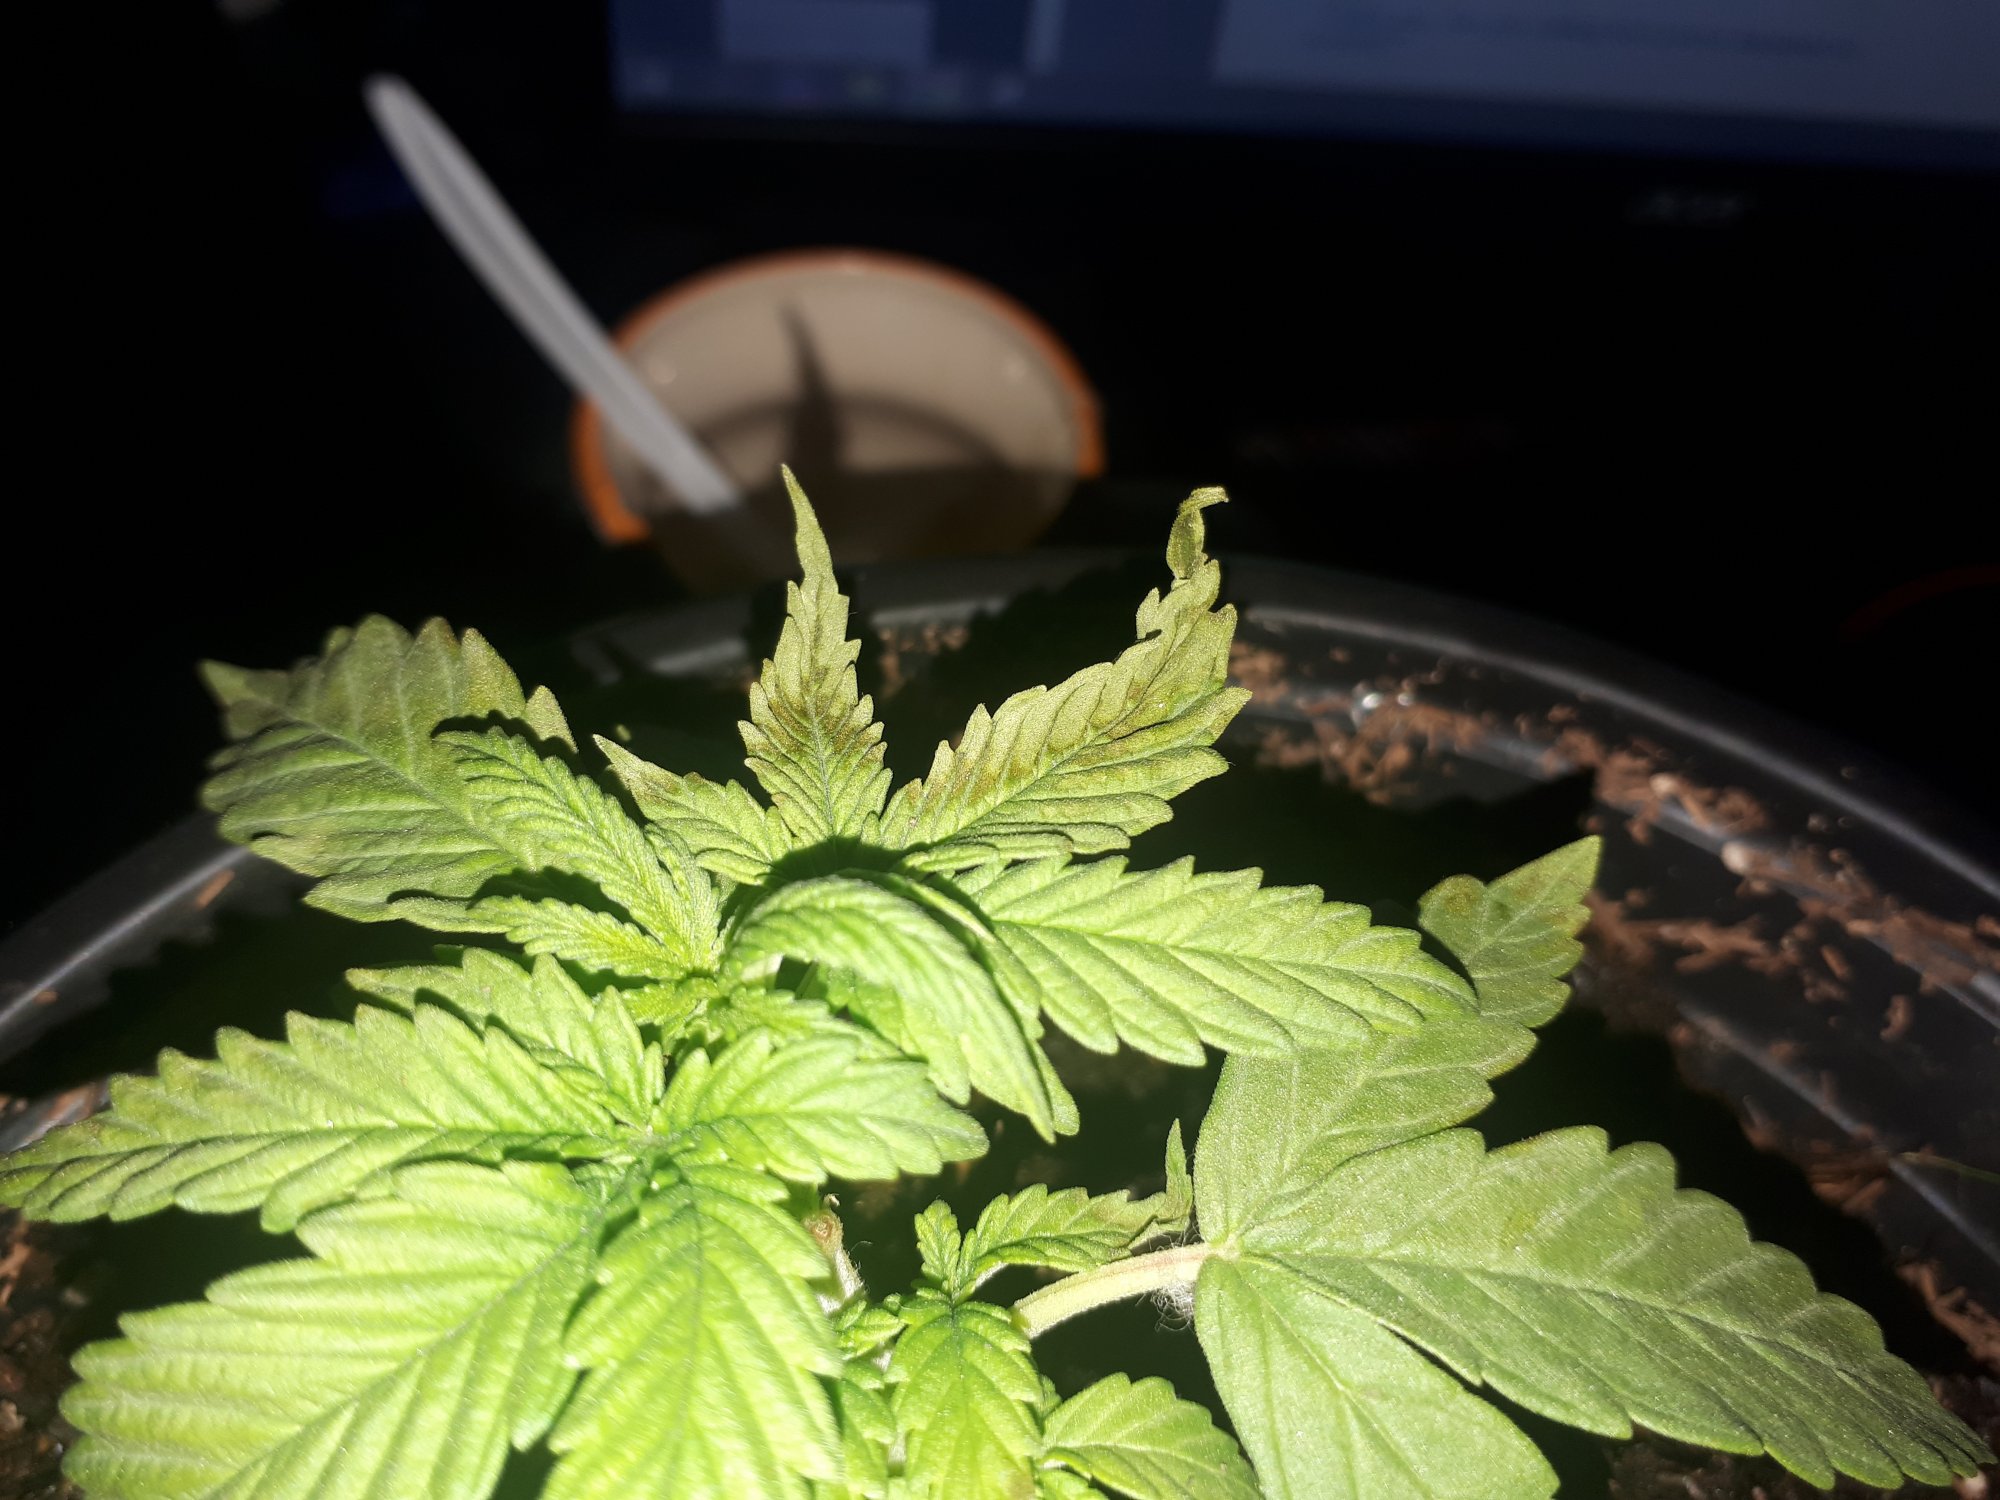 Help my plant stoped growing and now its leafs are turning dark brown and curling up 2